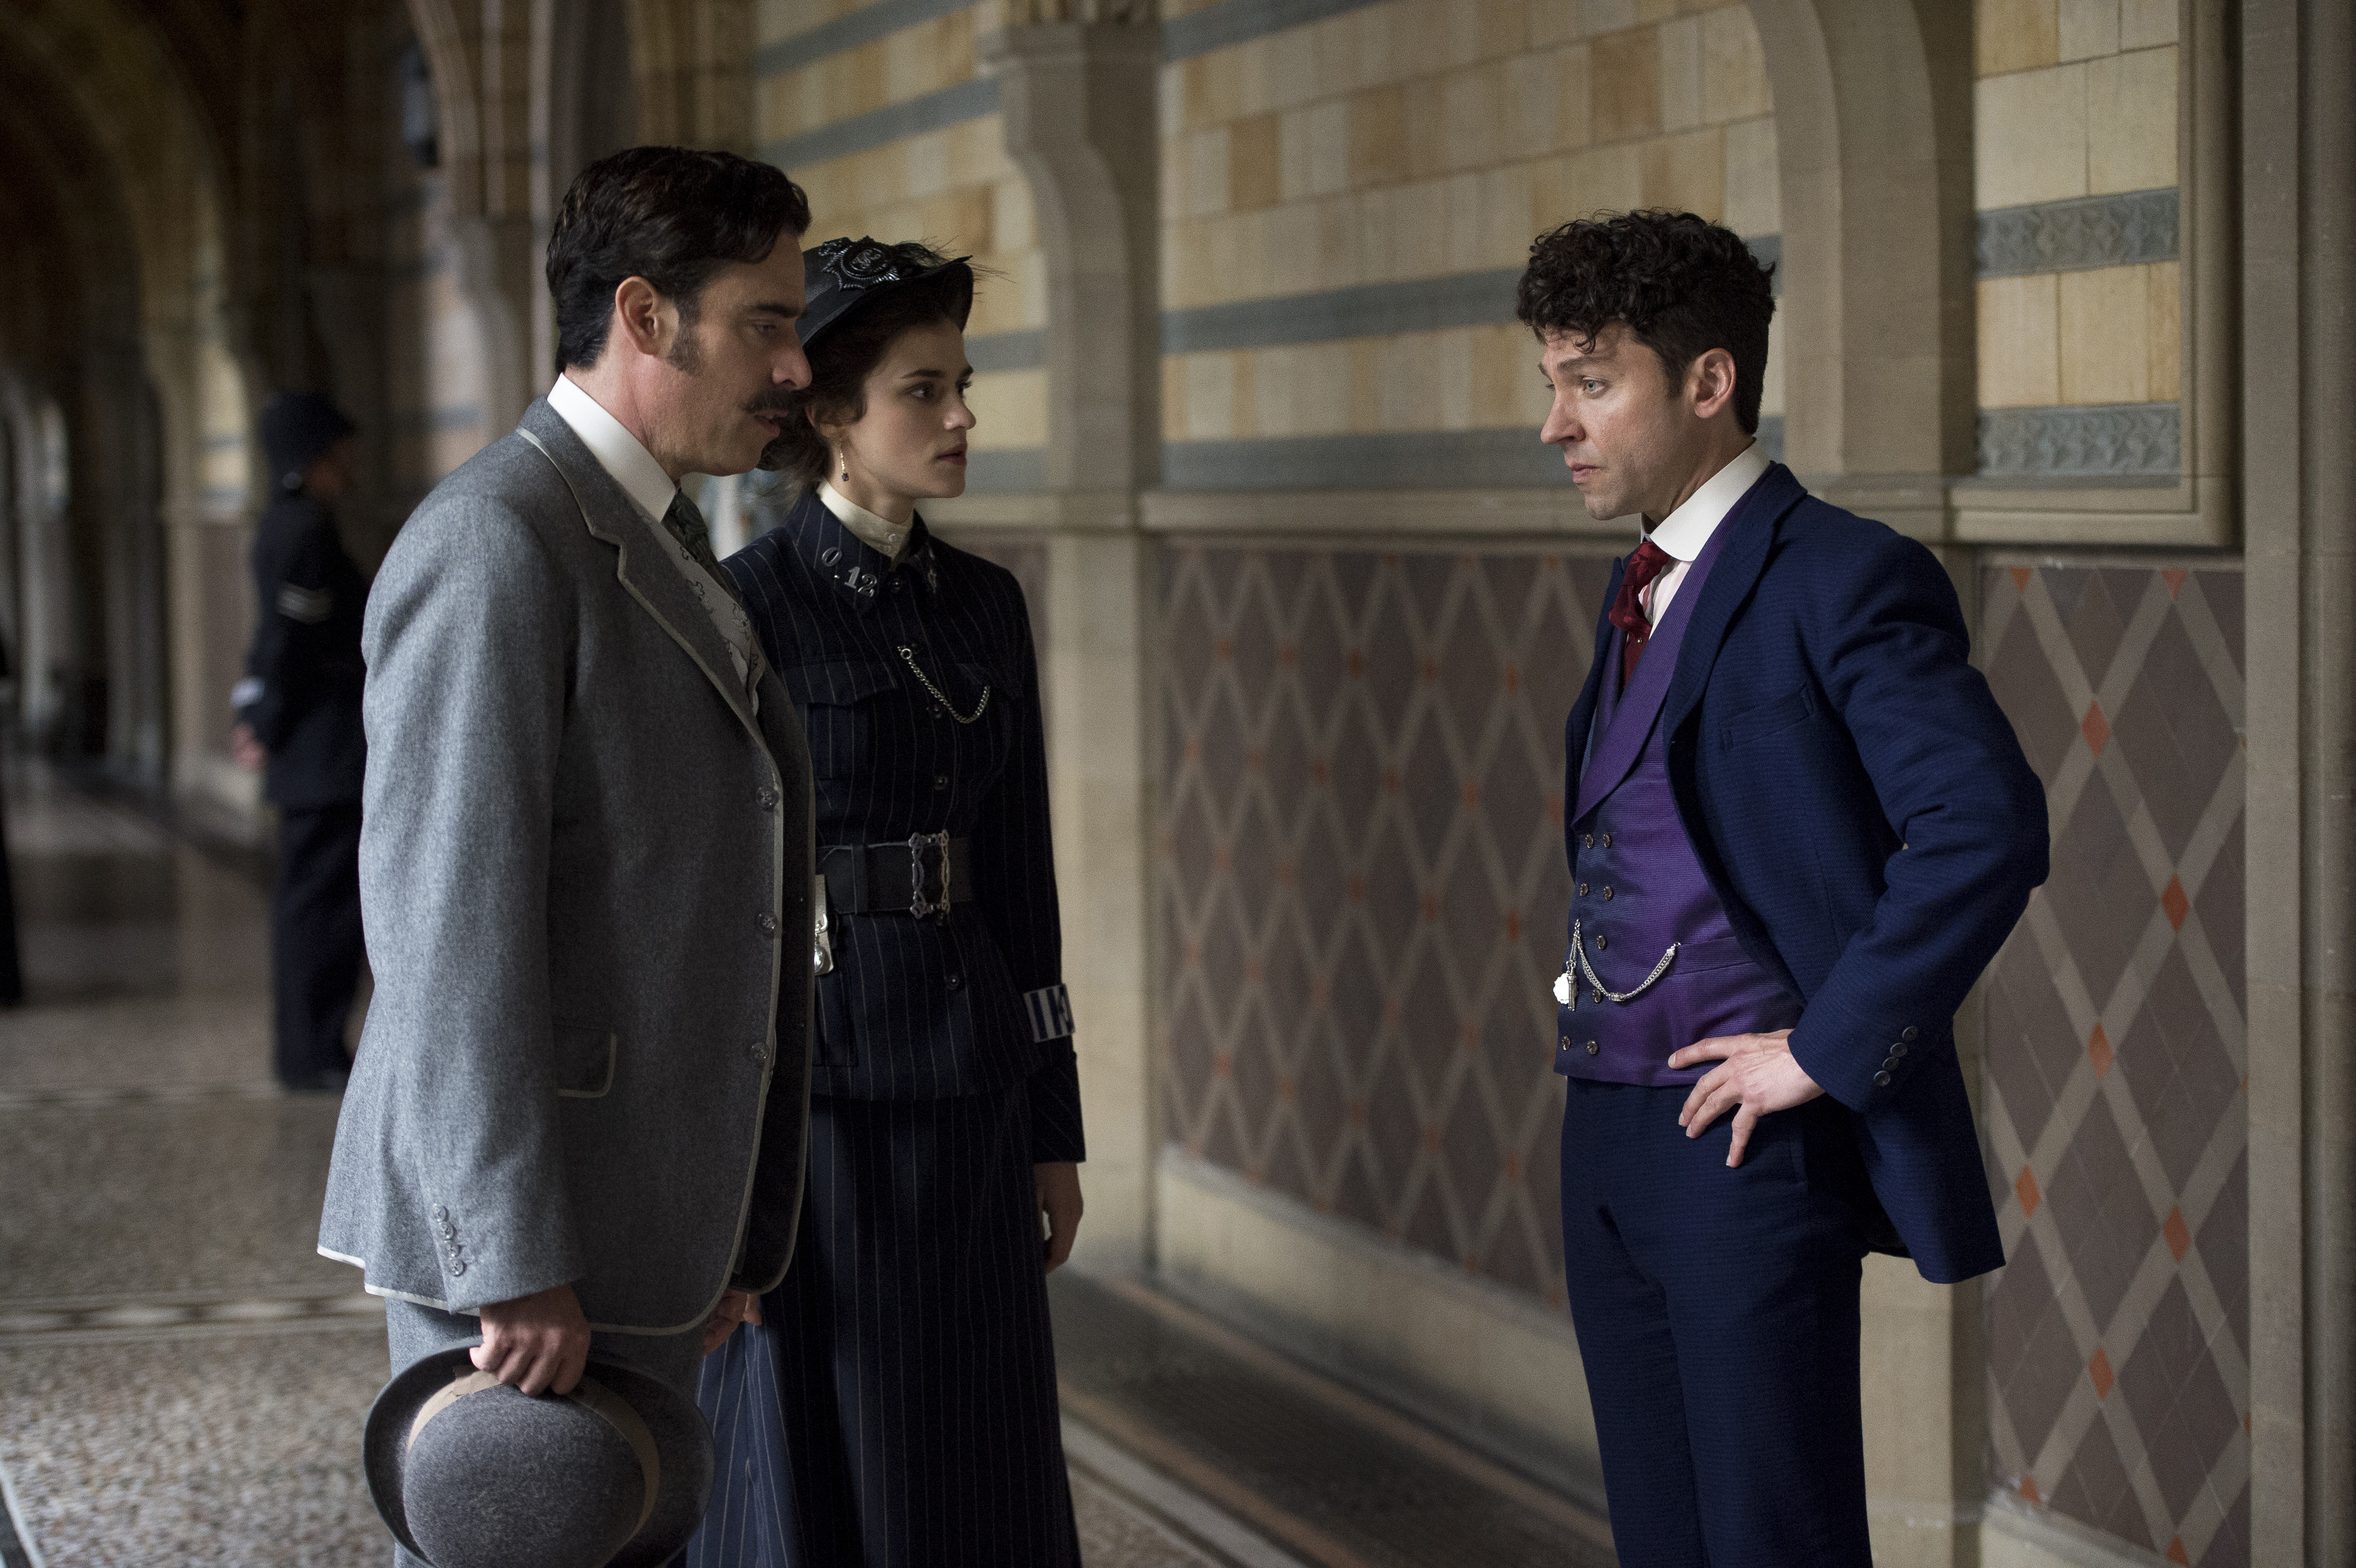 HOUDINI & DOYLE: L-R: Stephen Magadan, Rebecca Liddiard and Michael Weston in the “The Maggie’s Redress” series premiere episode of HOUDINI & DOYLE airing Monday, May 2 (9:00-10:00 PM ET/PT) on FOX. Cr: Robert Vigliasky.